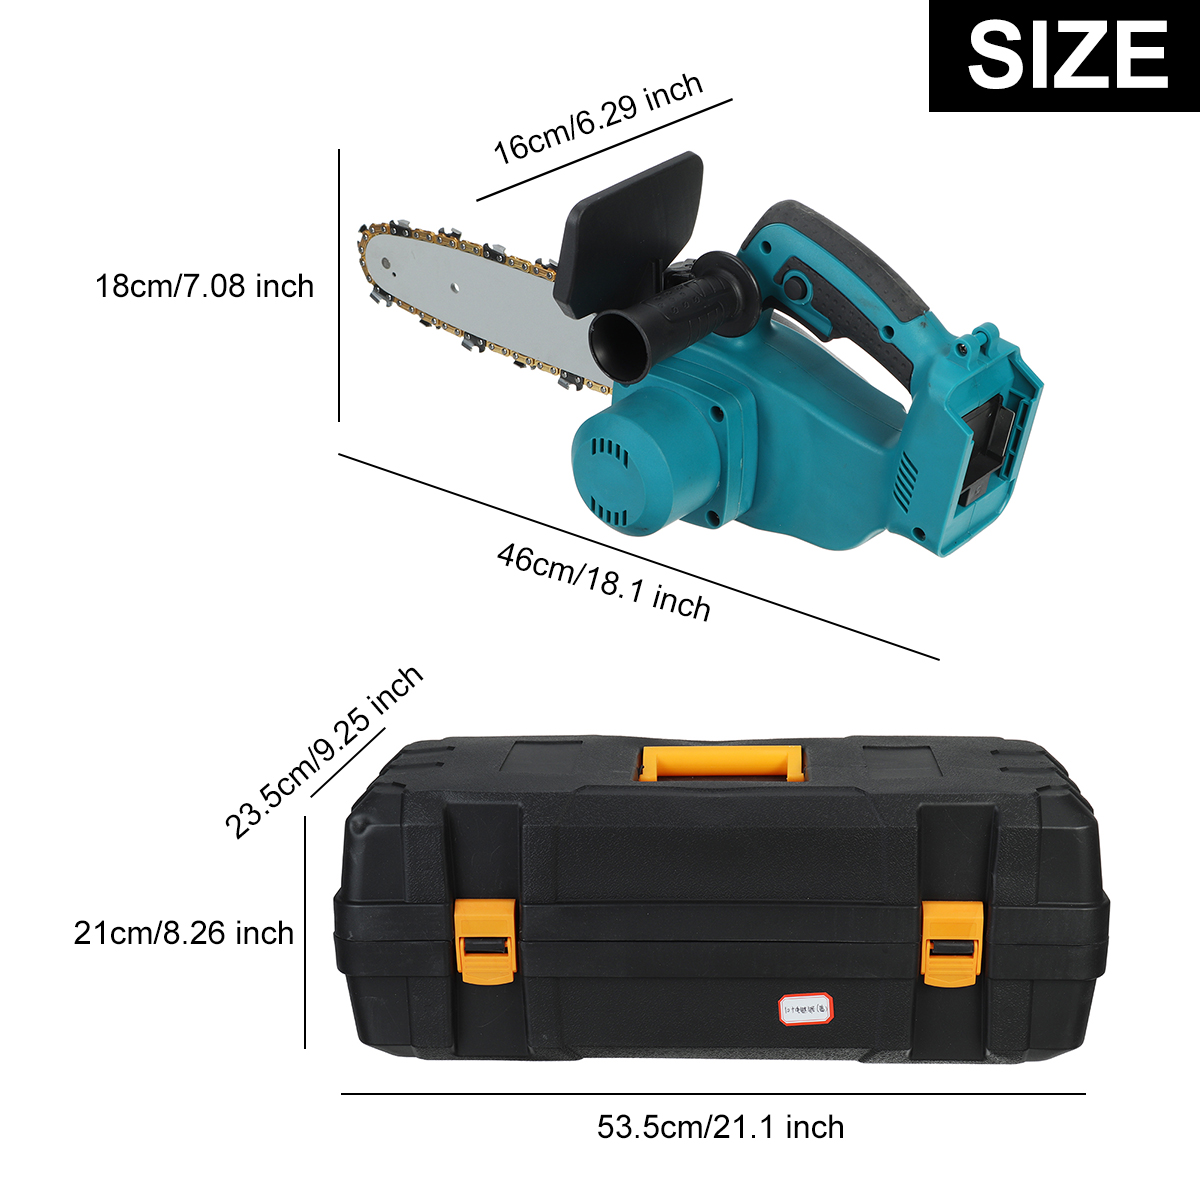 10-Inch-2000W-Brushless-Electric-Saw-Chainsaw-Garden-Woodworking-Wood-Cutters-Fit-Makita-18V-Battery-1890013-6